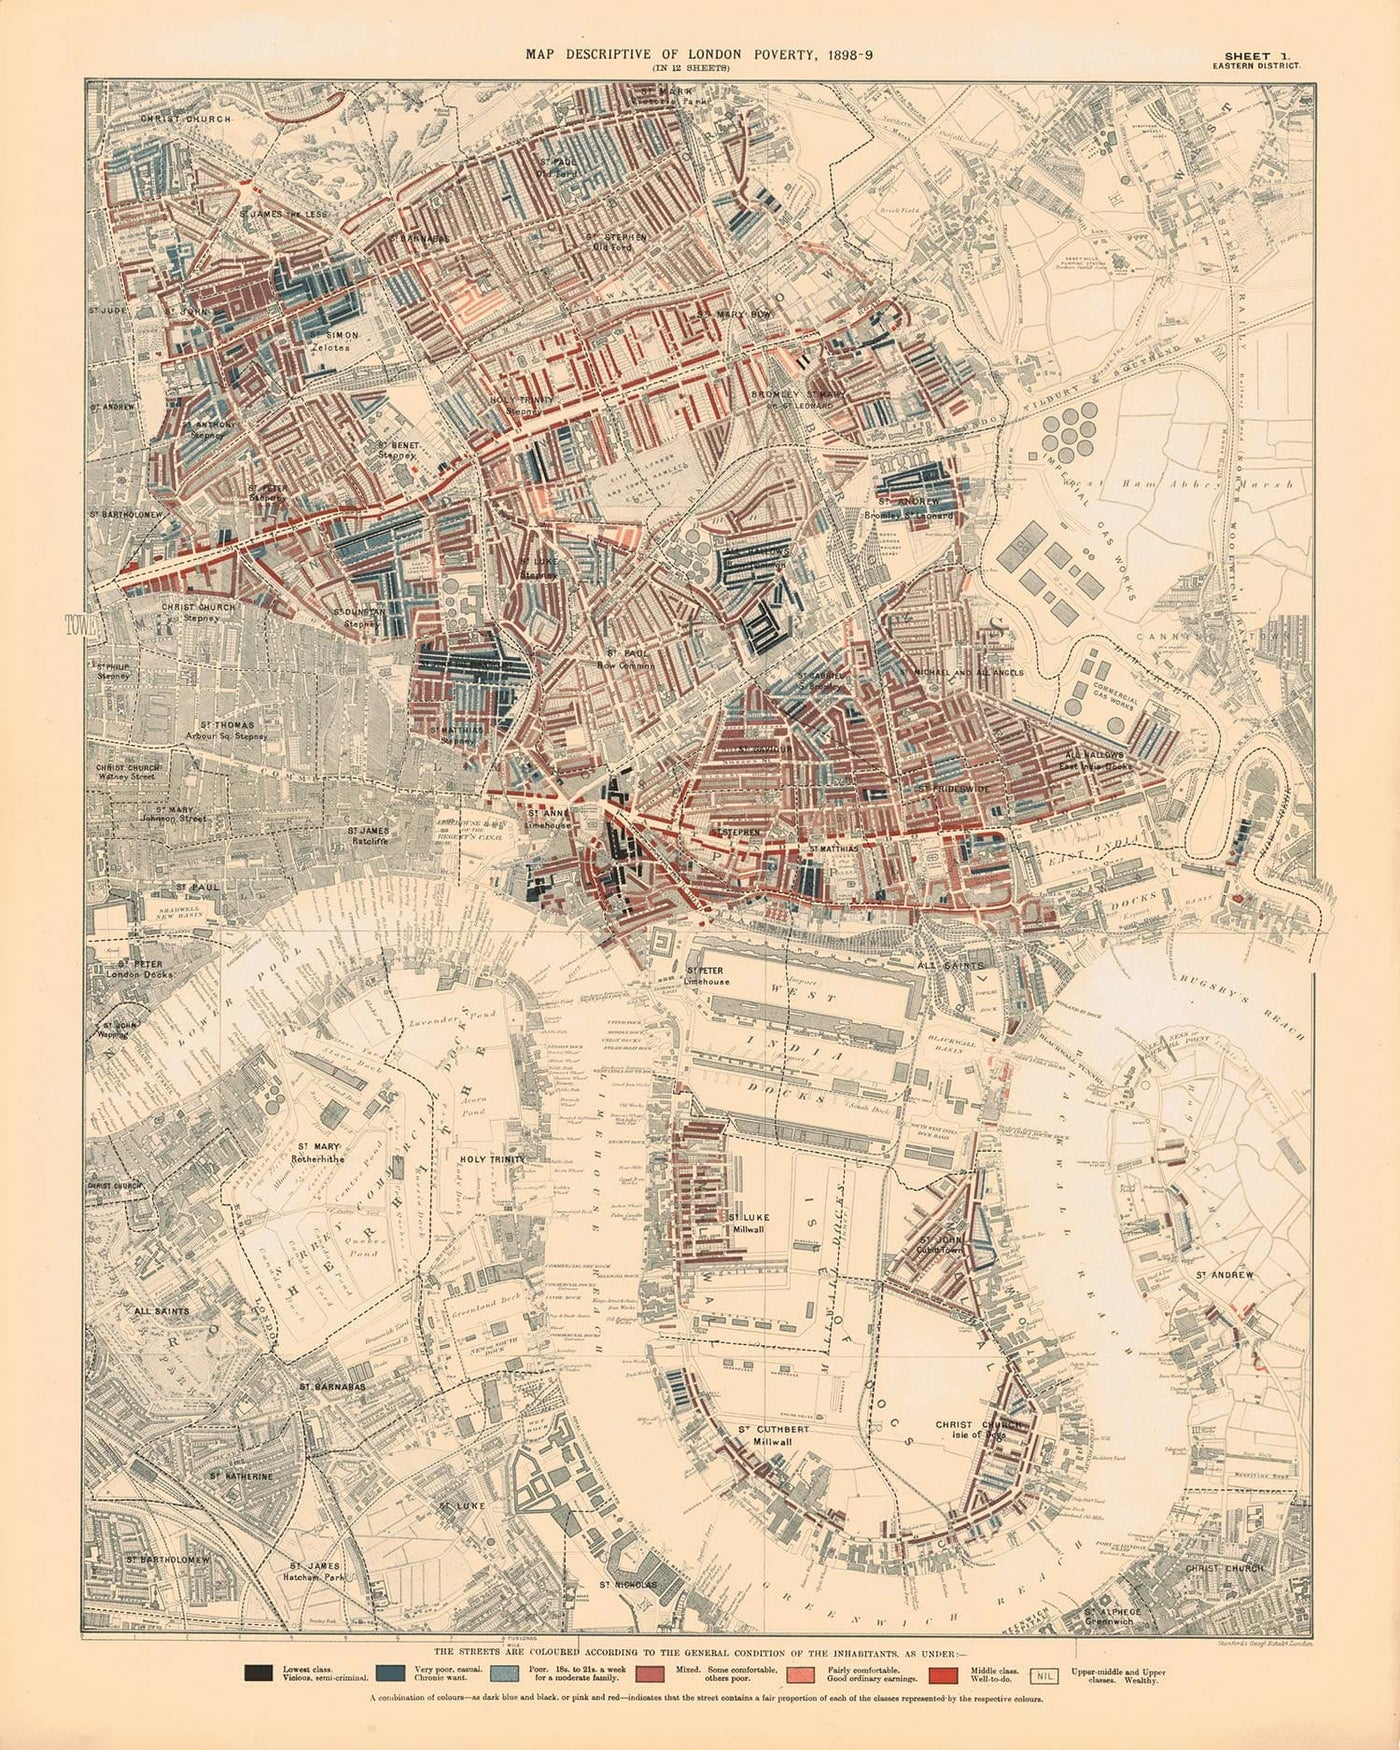 Map of London Poverty 1898-9, Eastern District, by Charles Booth - Isle of Dogs, Surrey Quays, West India, Canary Wharf - E3, E14, SE16, SE8, SE10